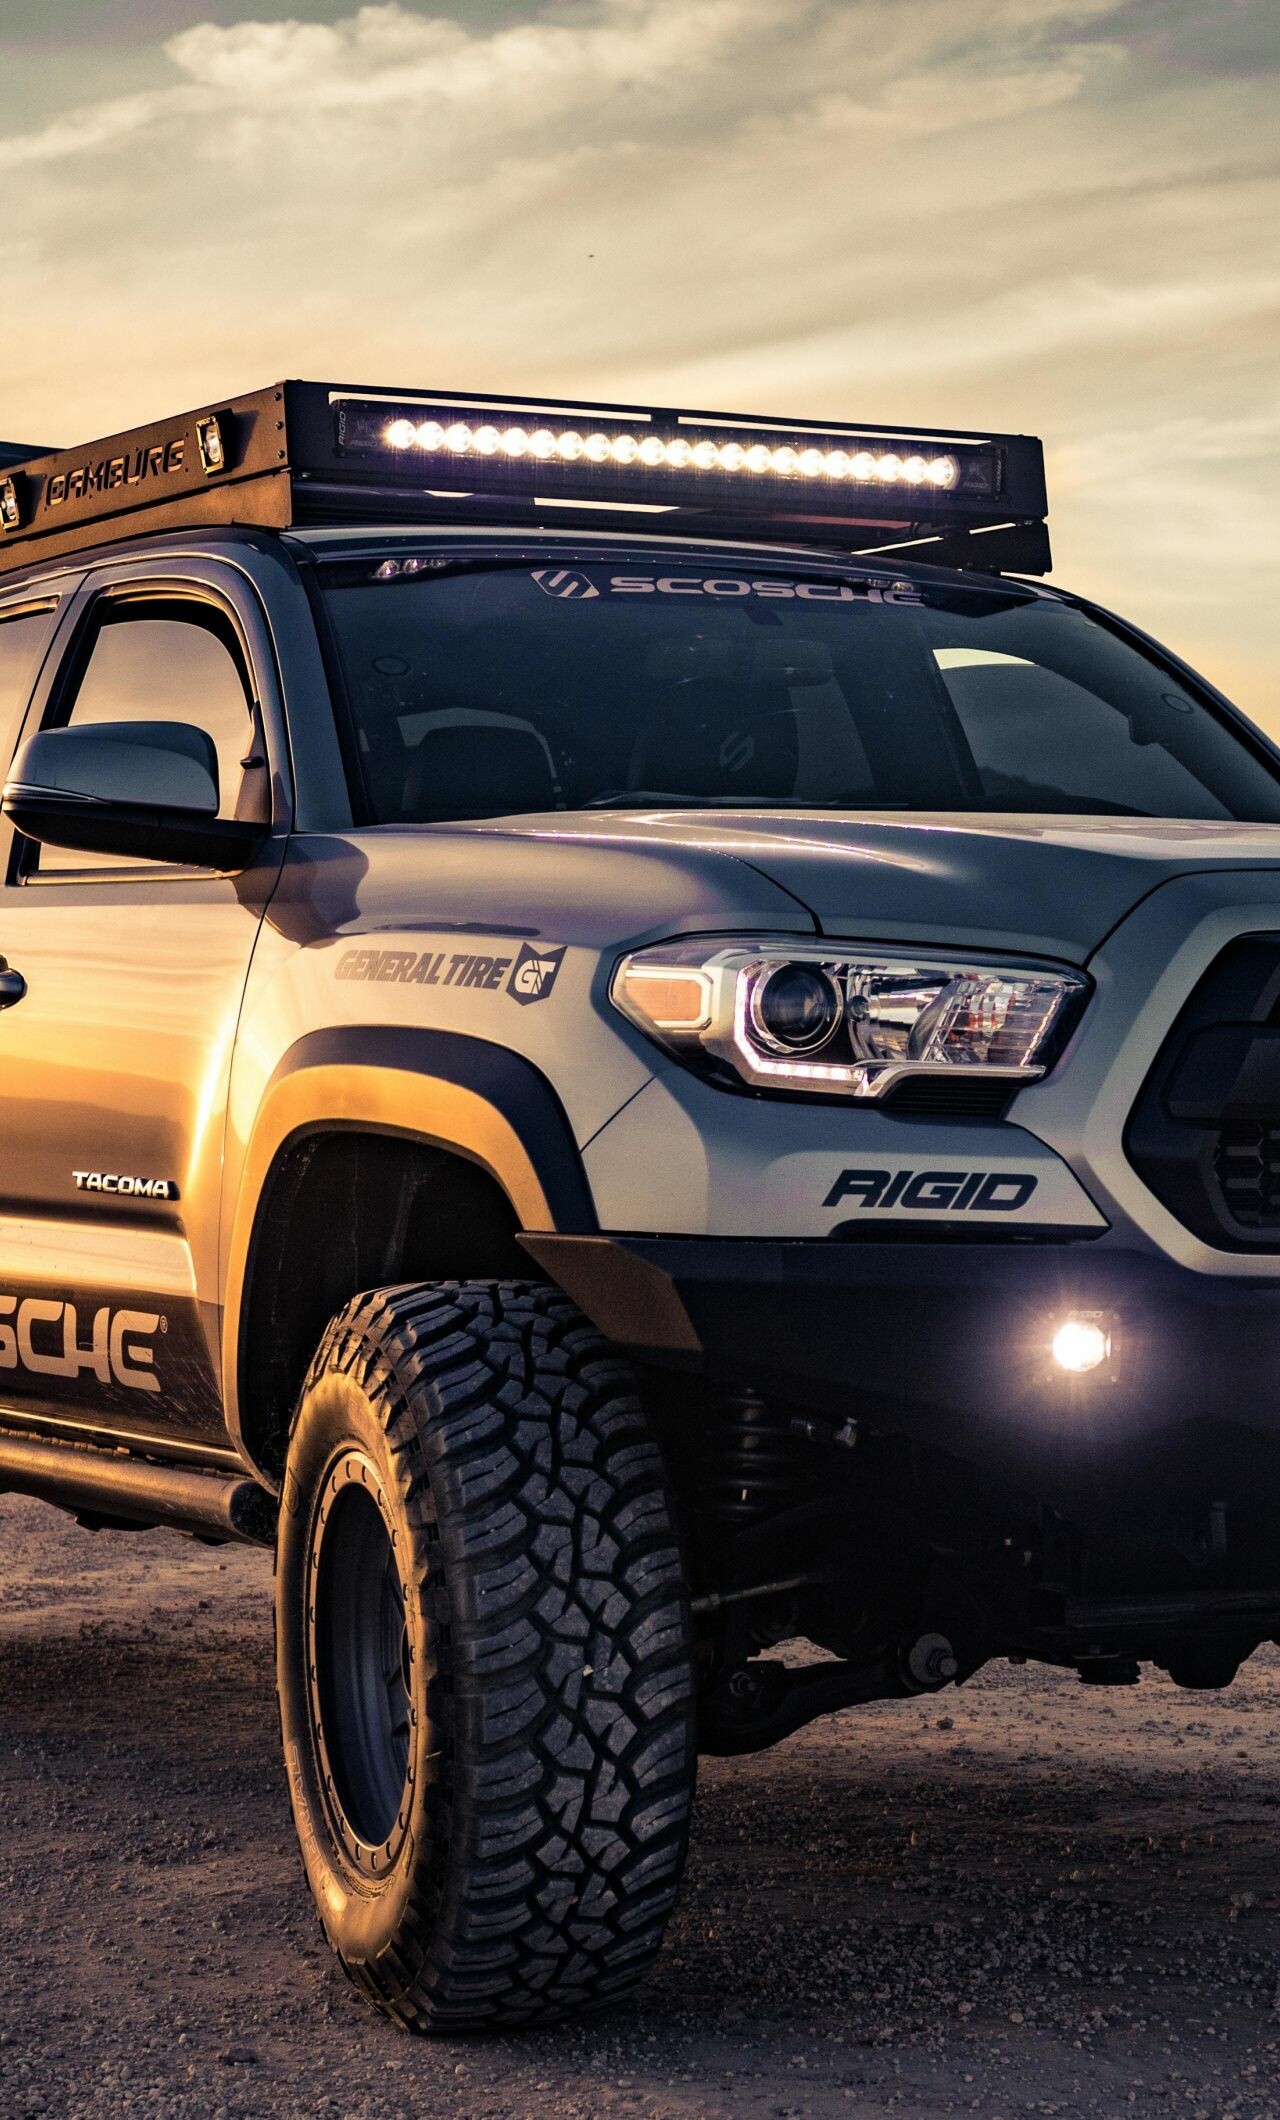 Toyota Tacoma: The TRD Pro package was offered for 2015 models. 1280x2120 HD Wallpaper.